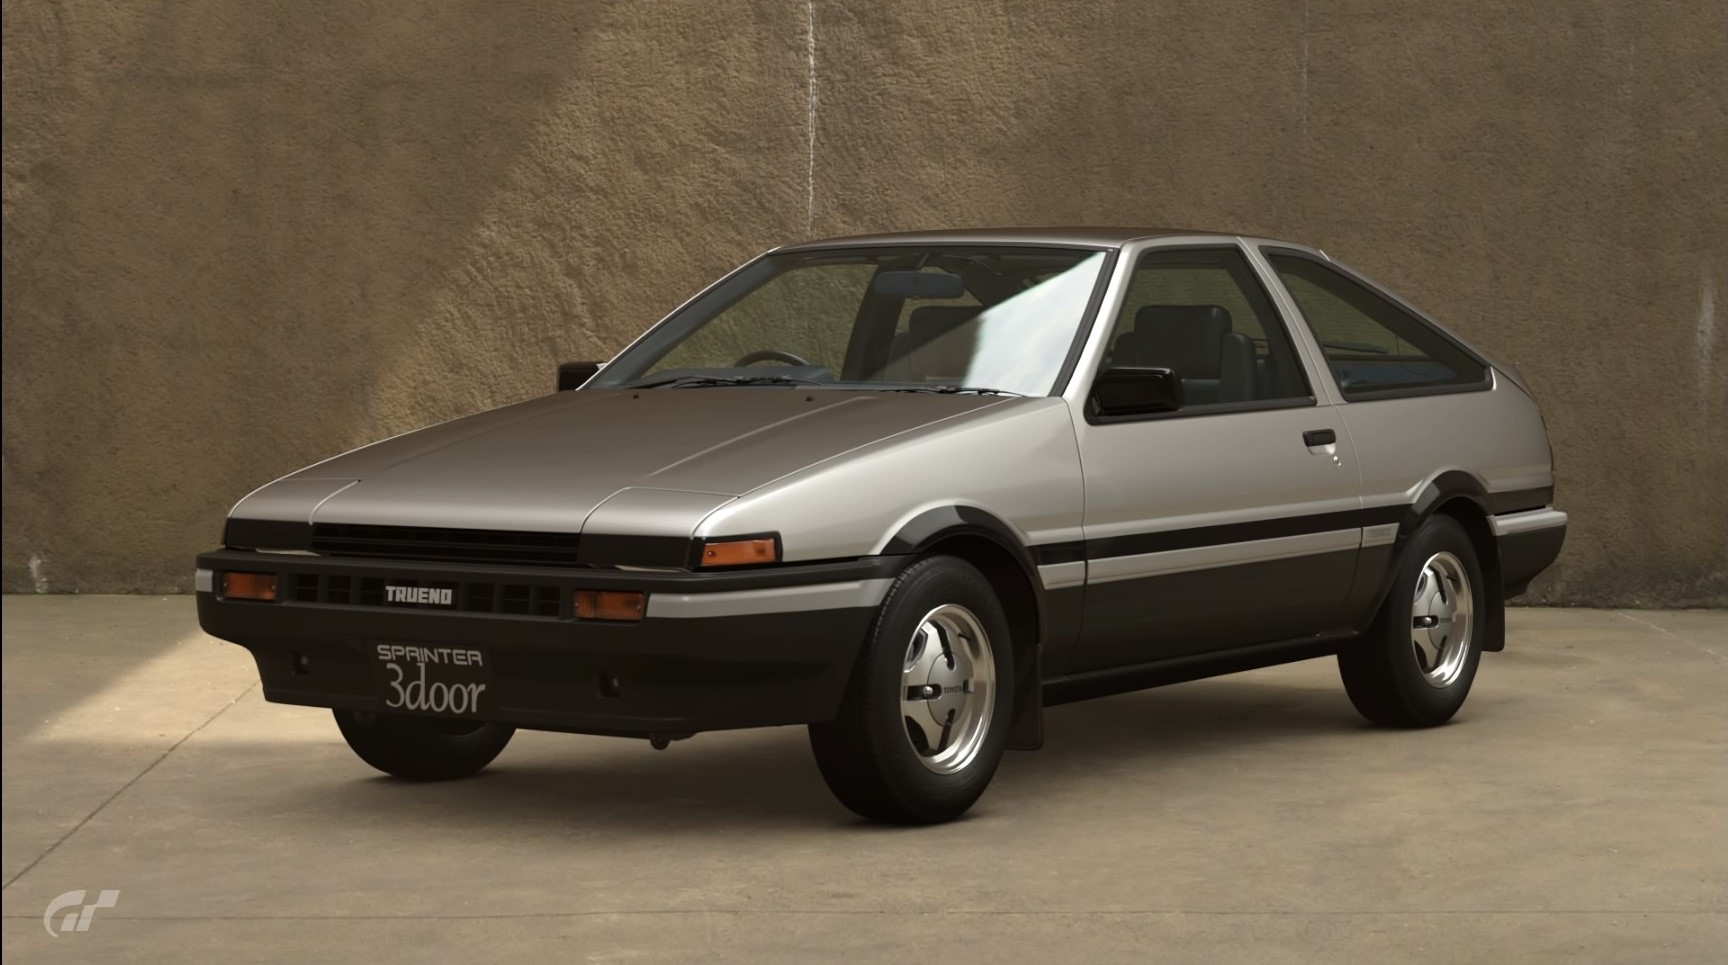 Toyota Ae86 Anime Wallpapers - Wallpaper Cave